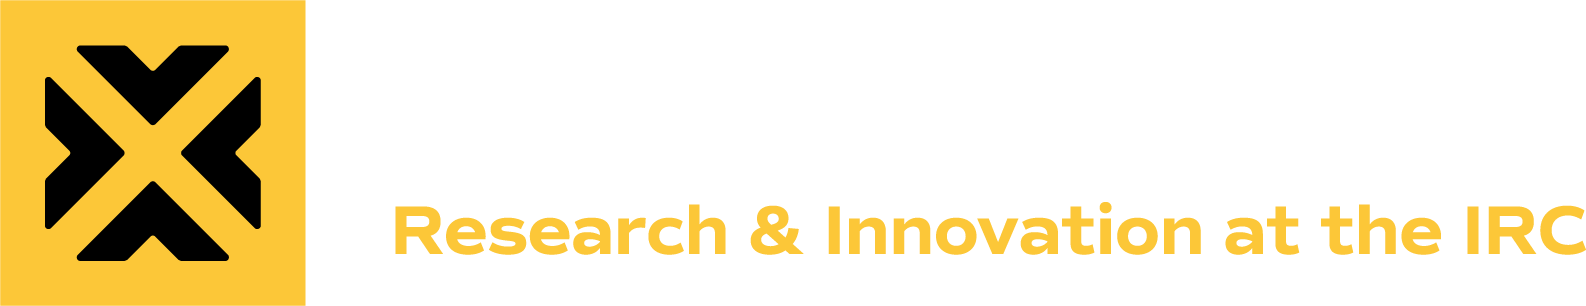 Airbel Impact Lab - Research & Innovation at the IRC